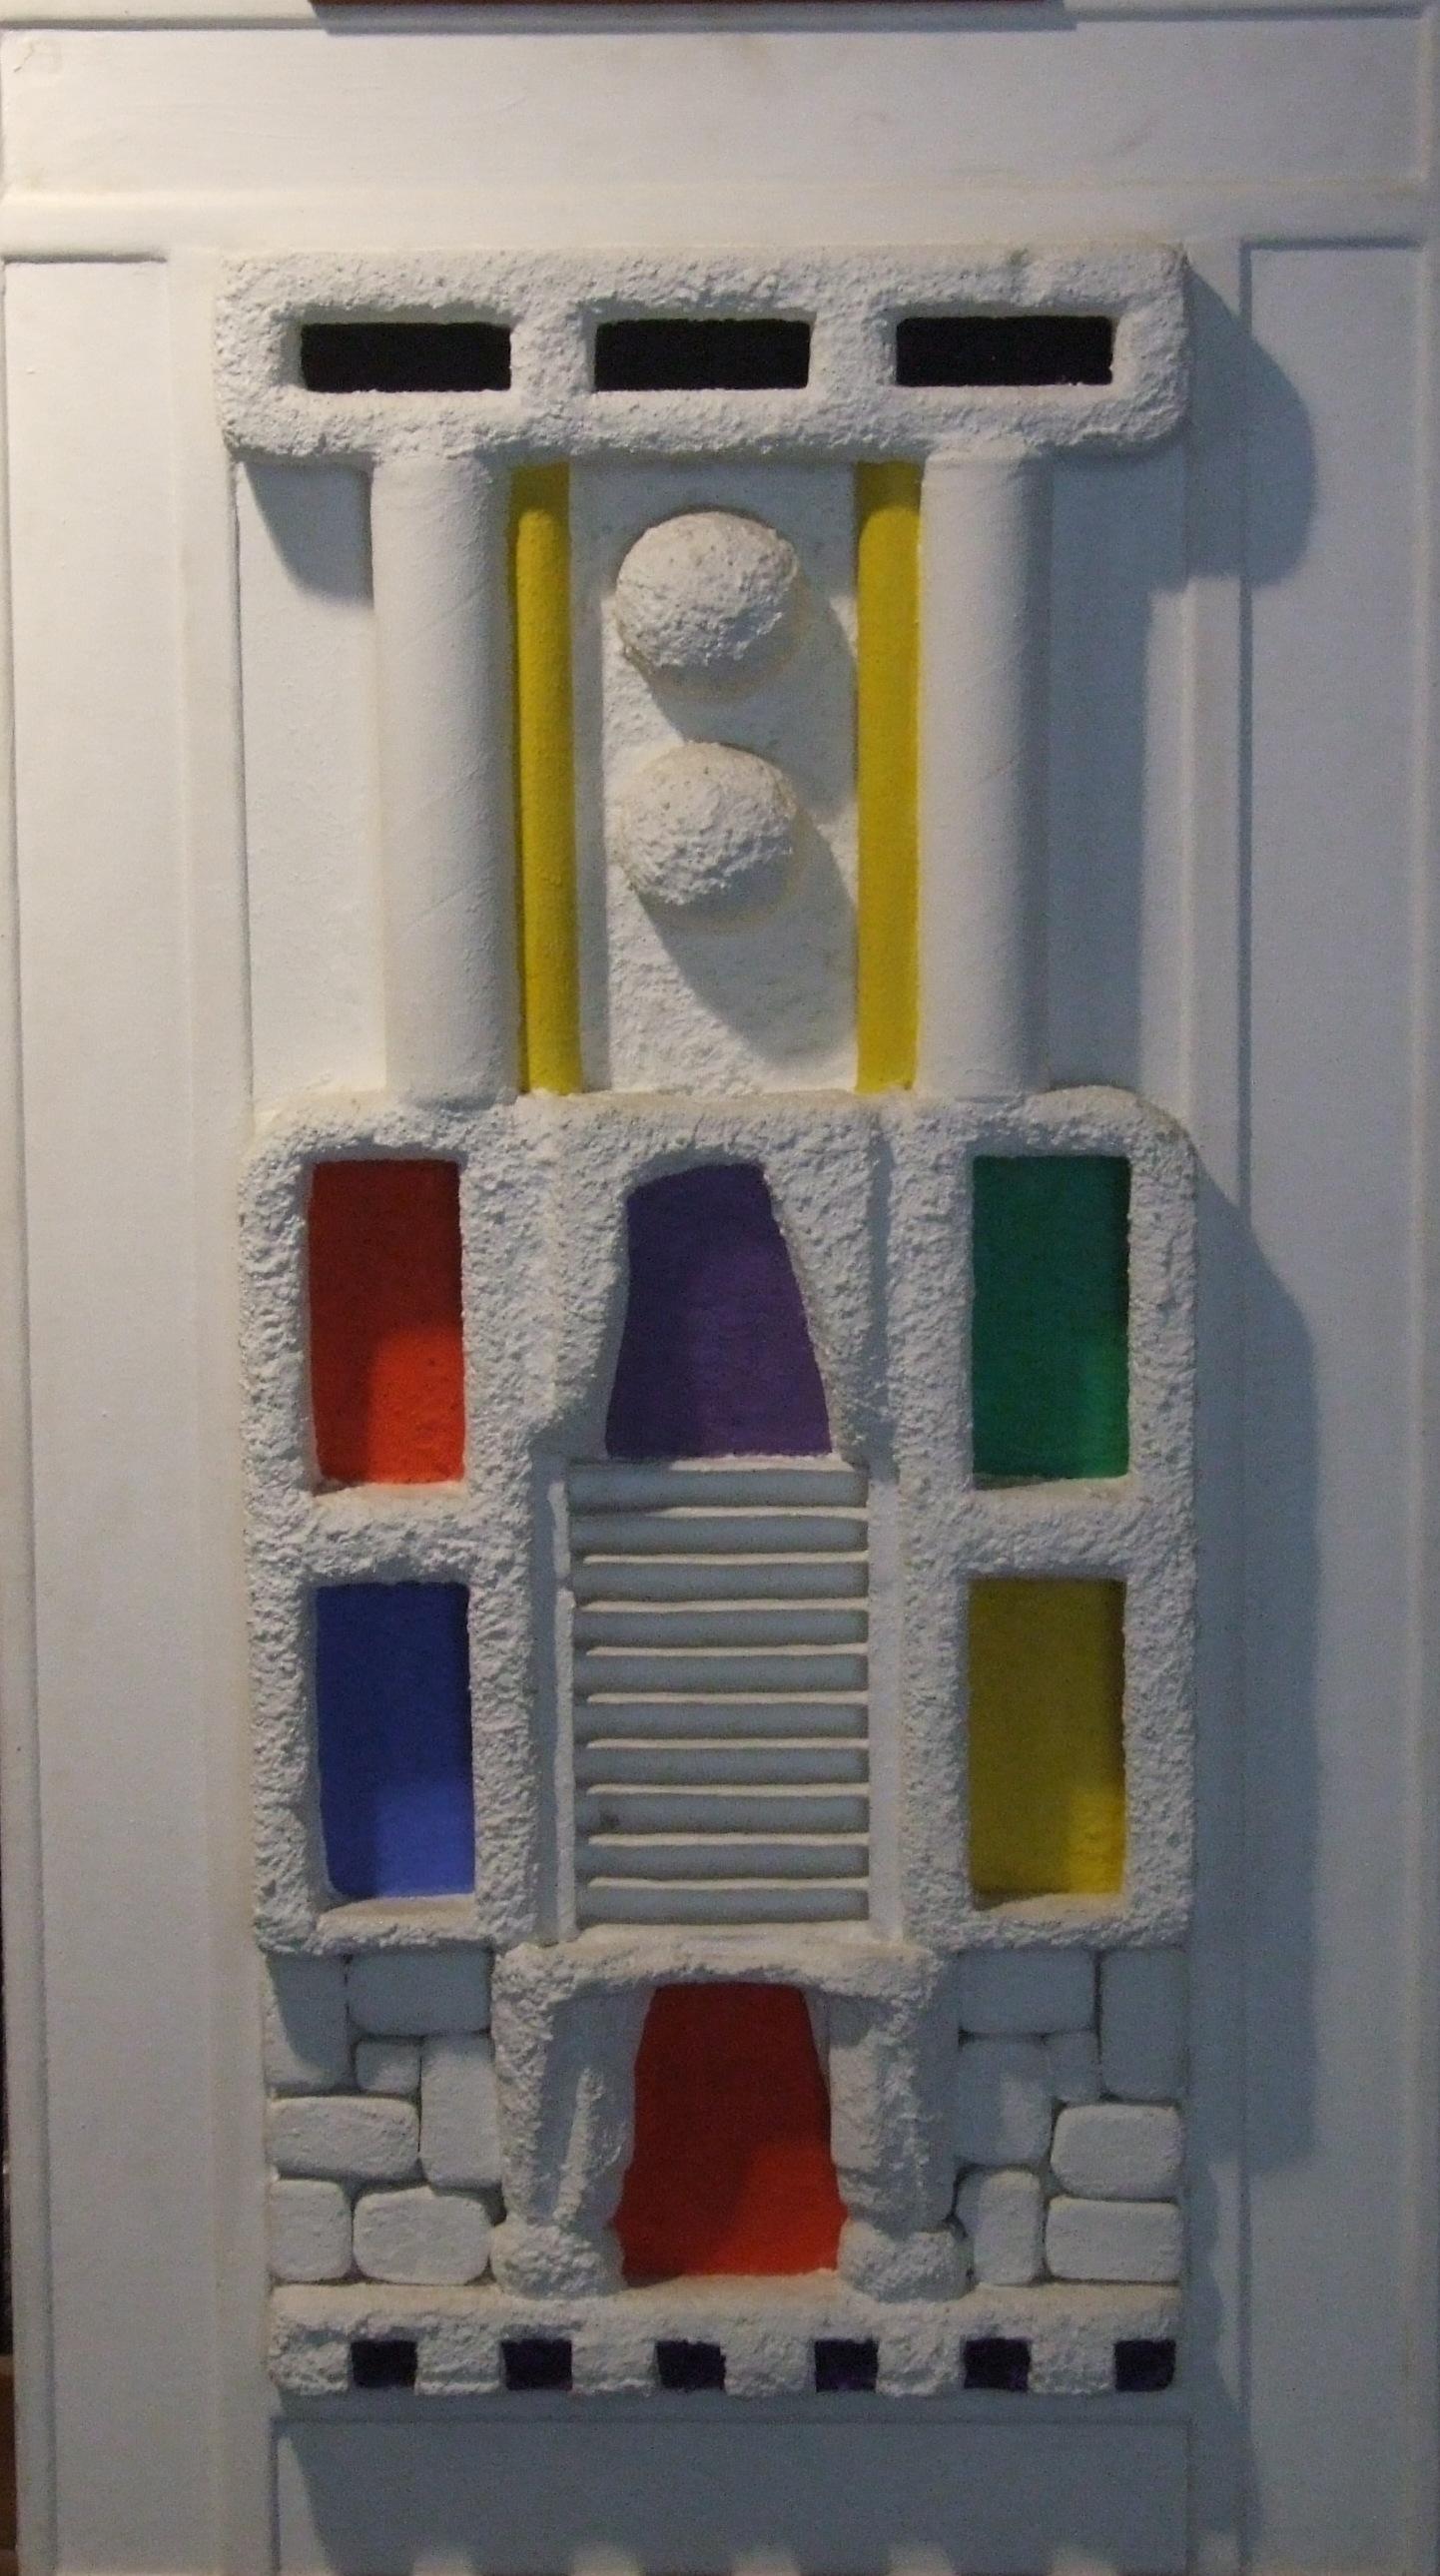 composition 1, 1986 - mixed media and wood, 99x55x7 cm. - Mixed Media Art by Wisseling L.